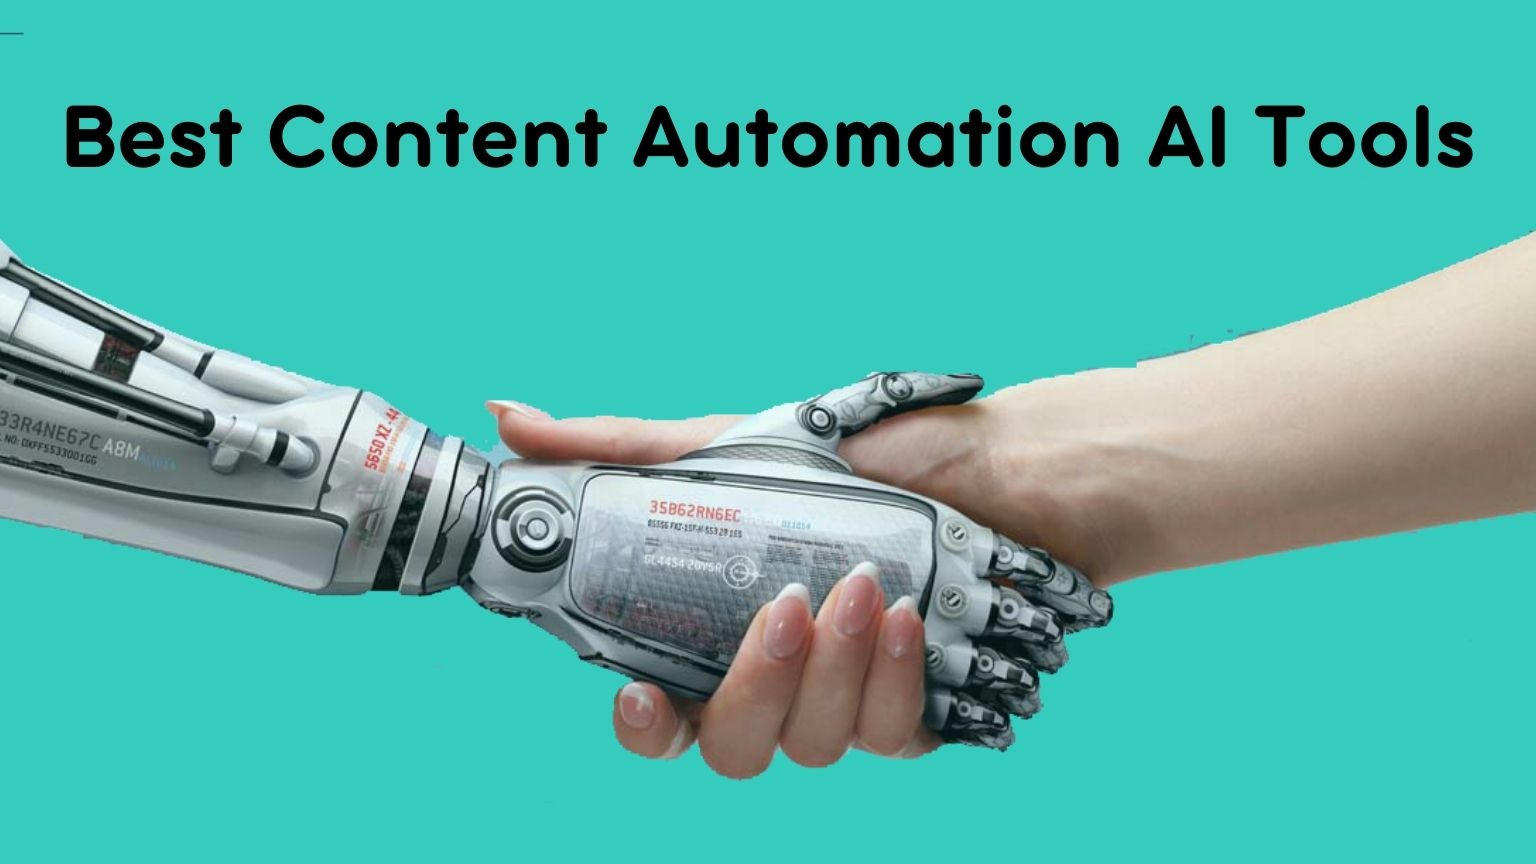 Best Content Automation AI Tools